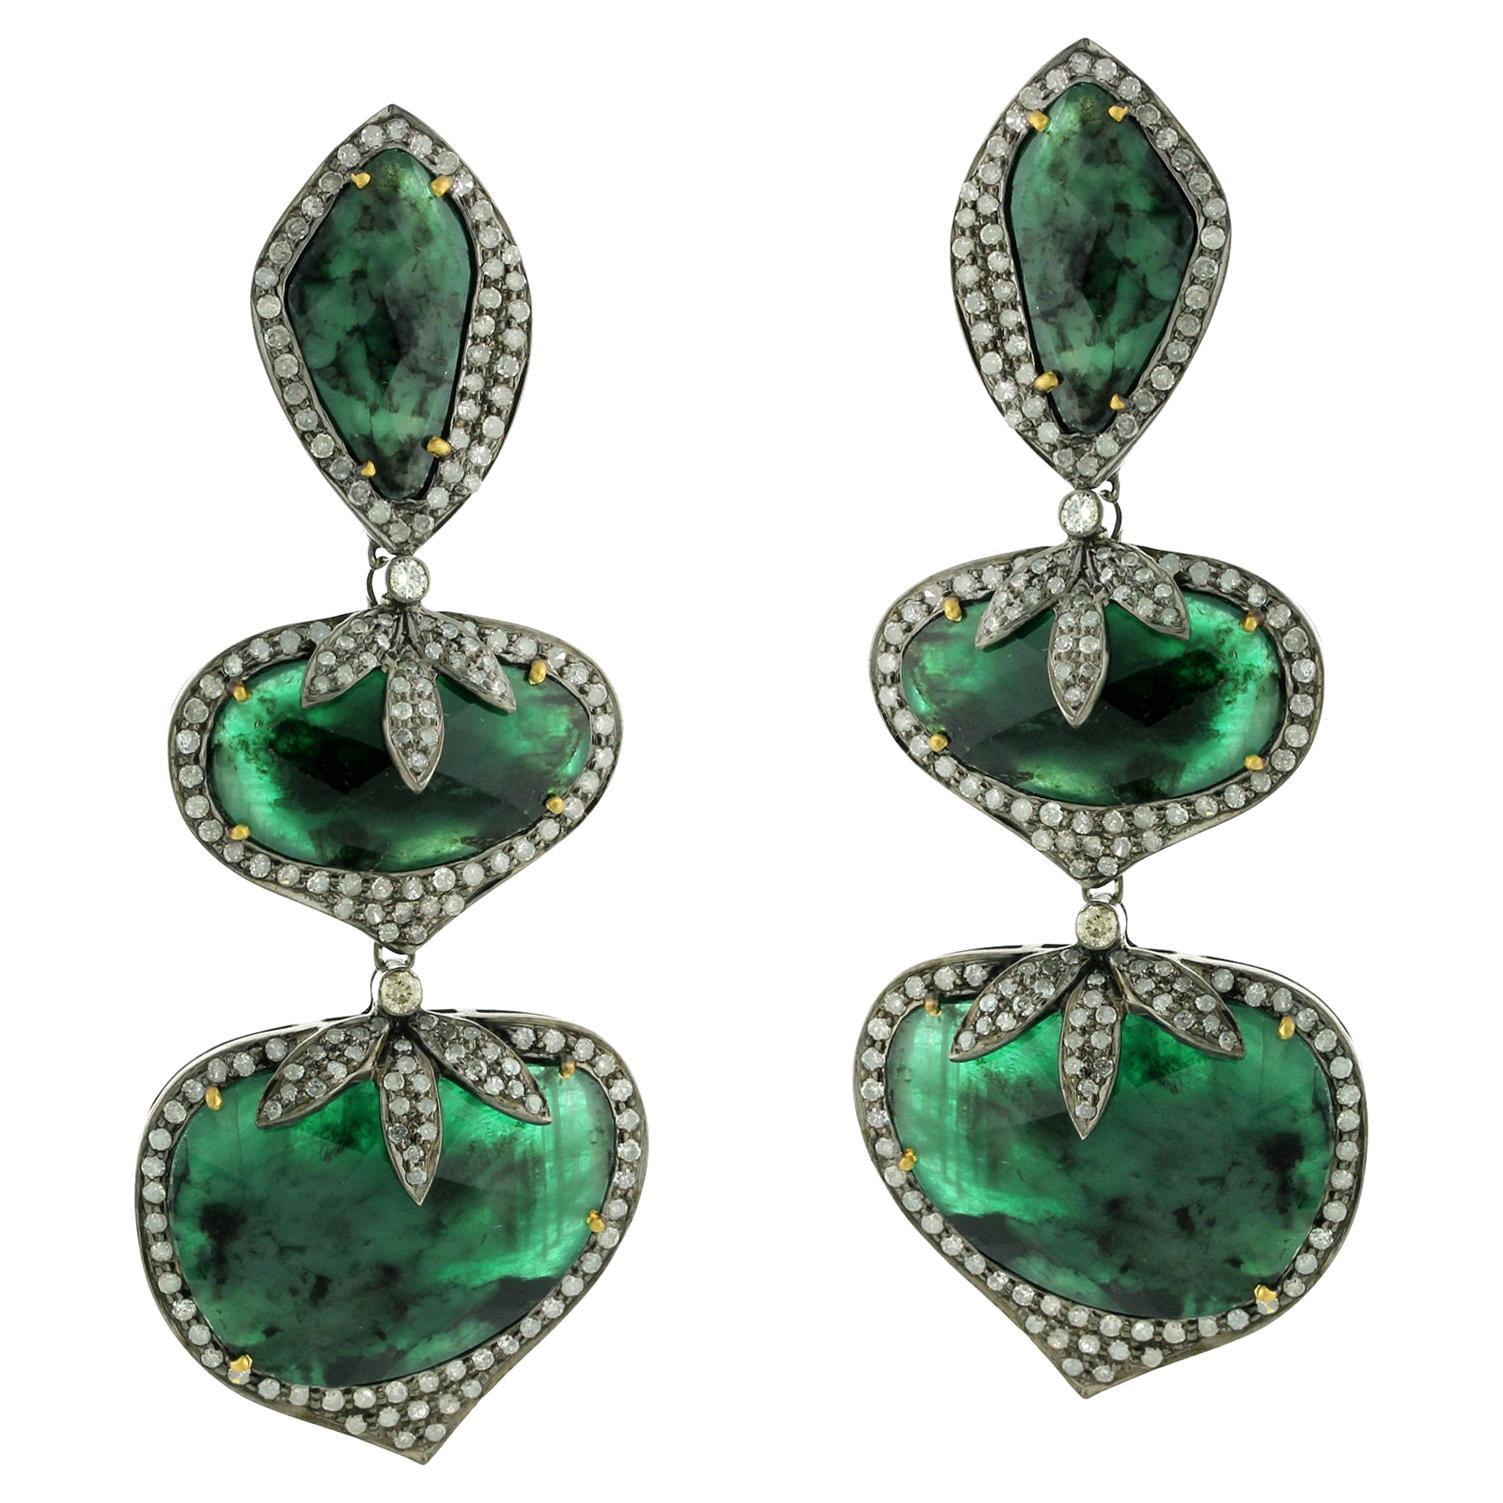 45.8ct Vivid Green Emerald 3 Tier Dangle Earrings With Diamond In 18k White Gold